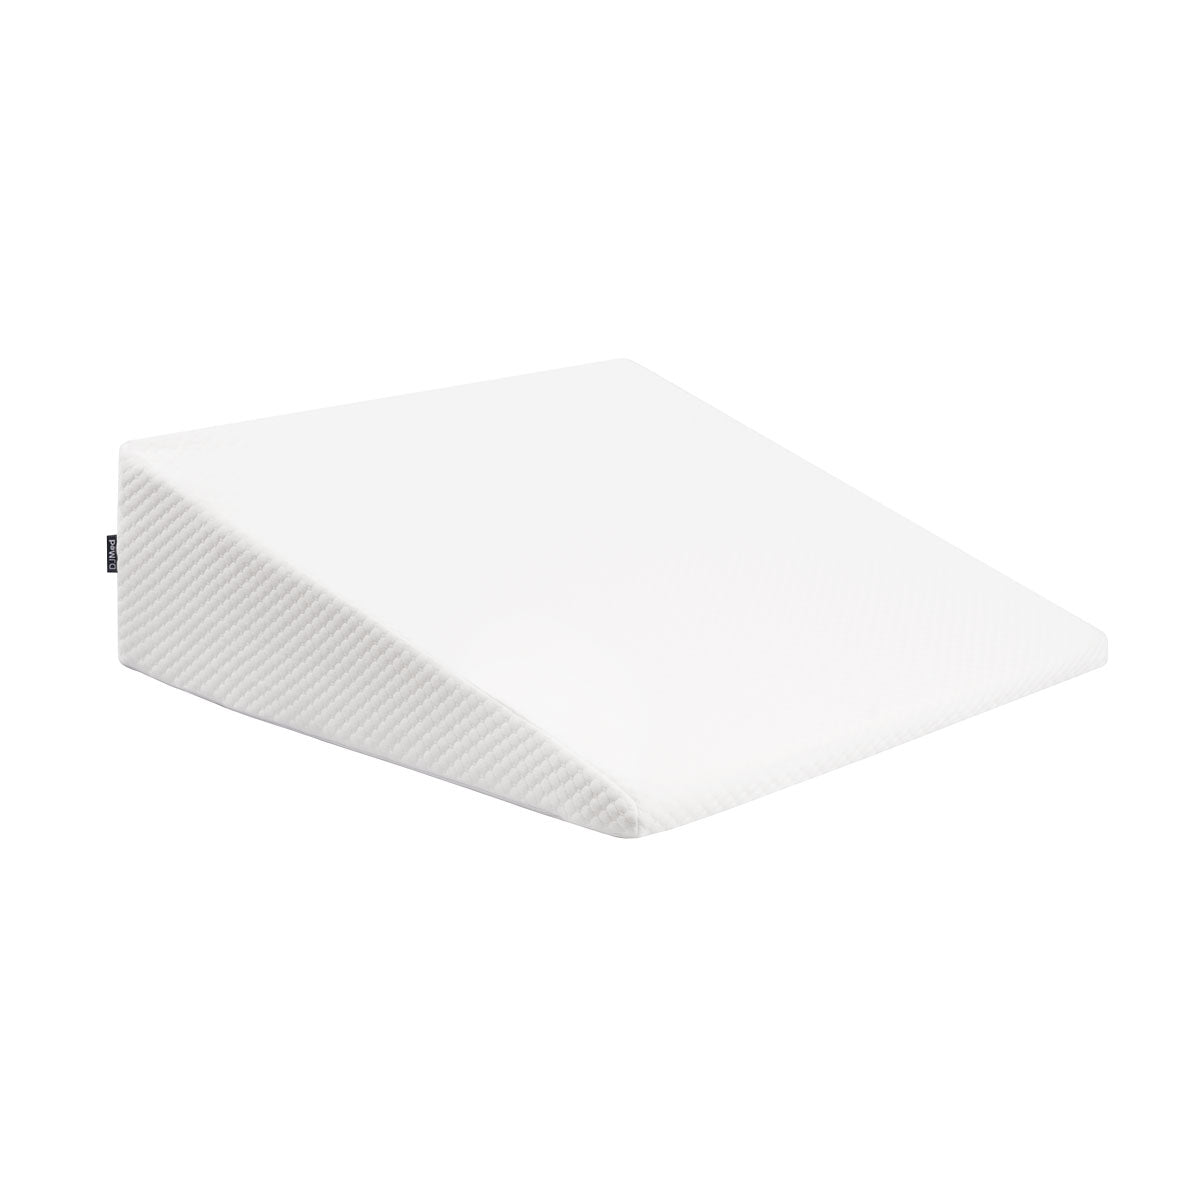 Body Support Bed Wedge - White